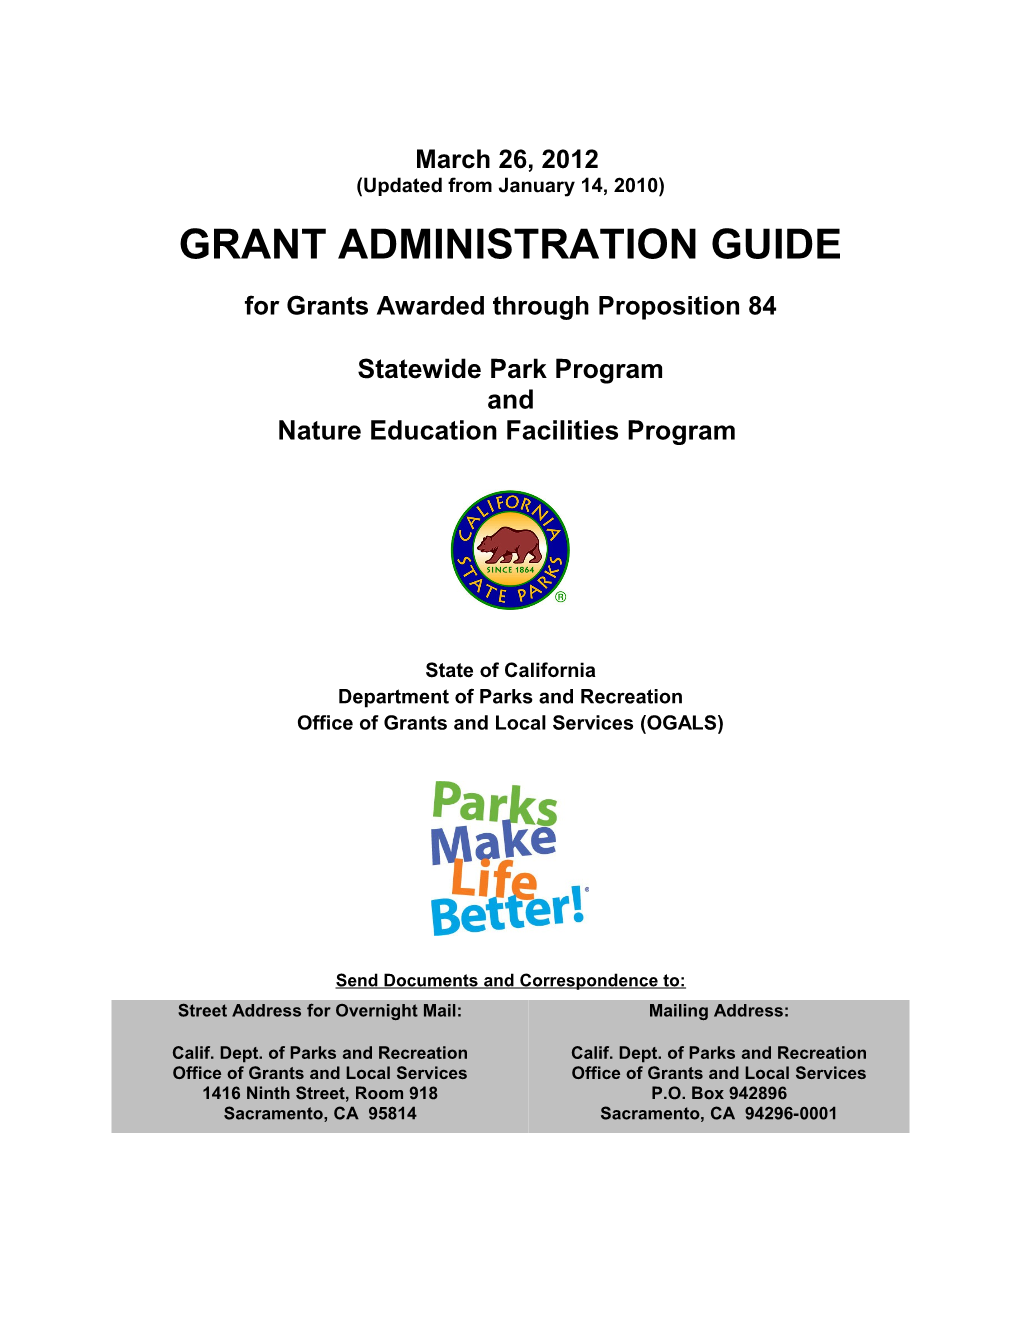 For Grants Awarded Through Proposition 84